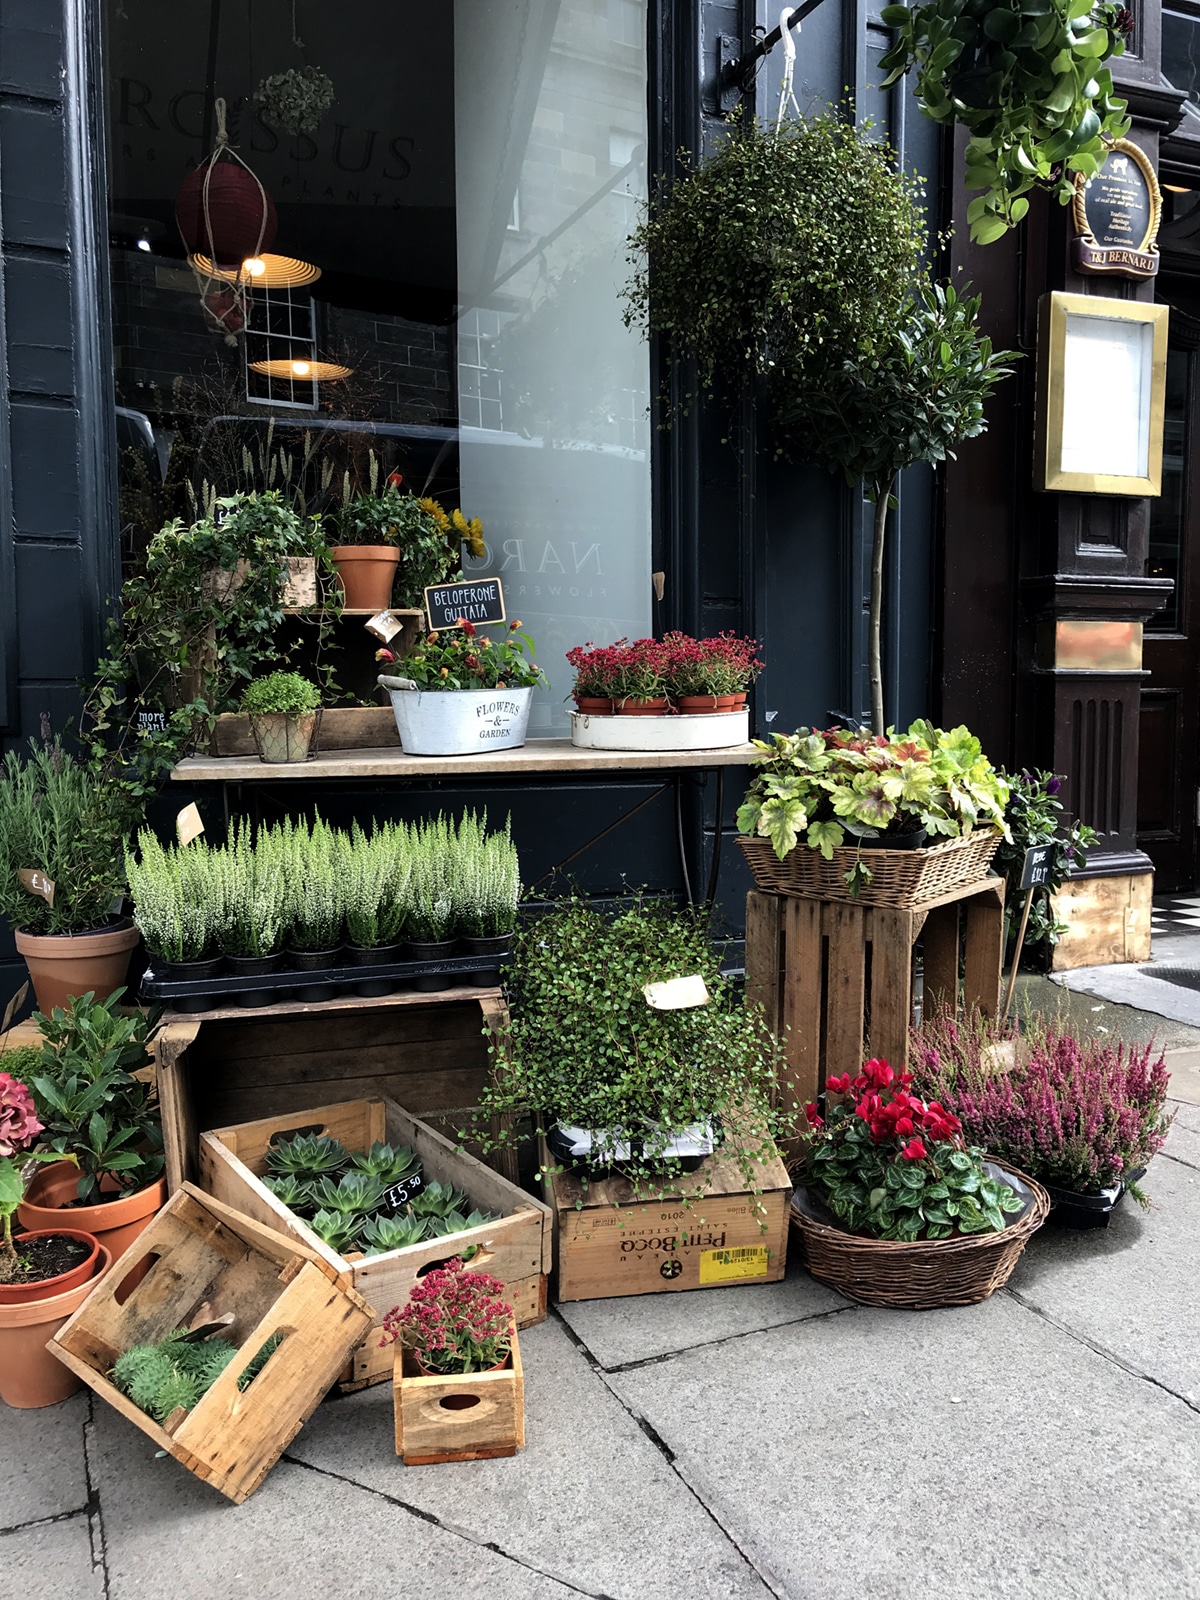 narcissus flower shop in broughton | edinburgh city guide on cooc kelley